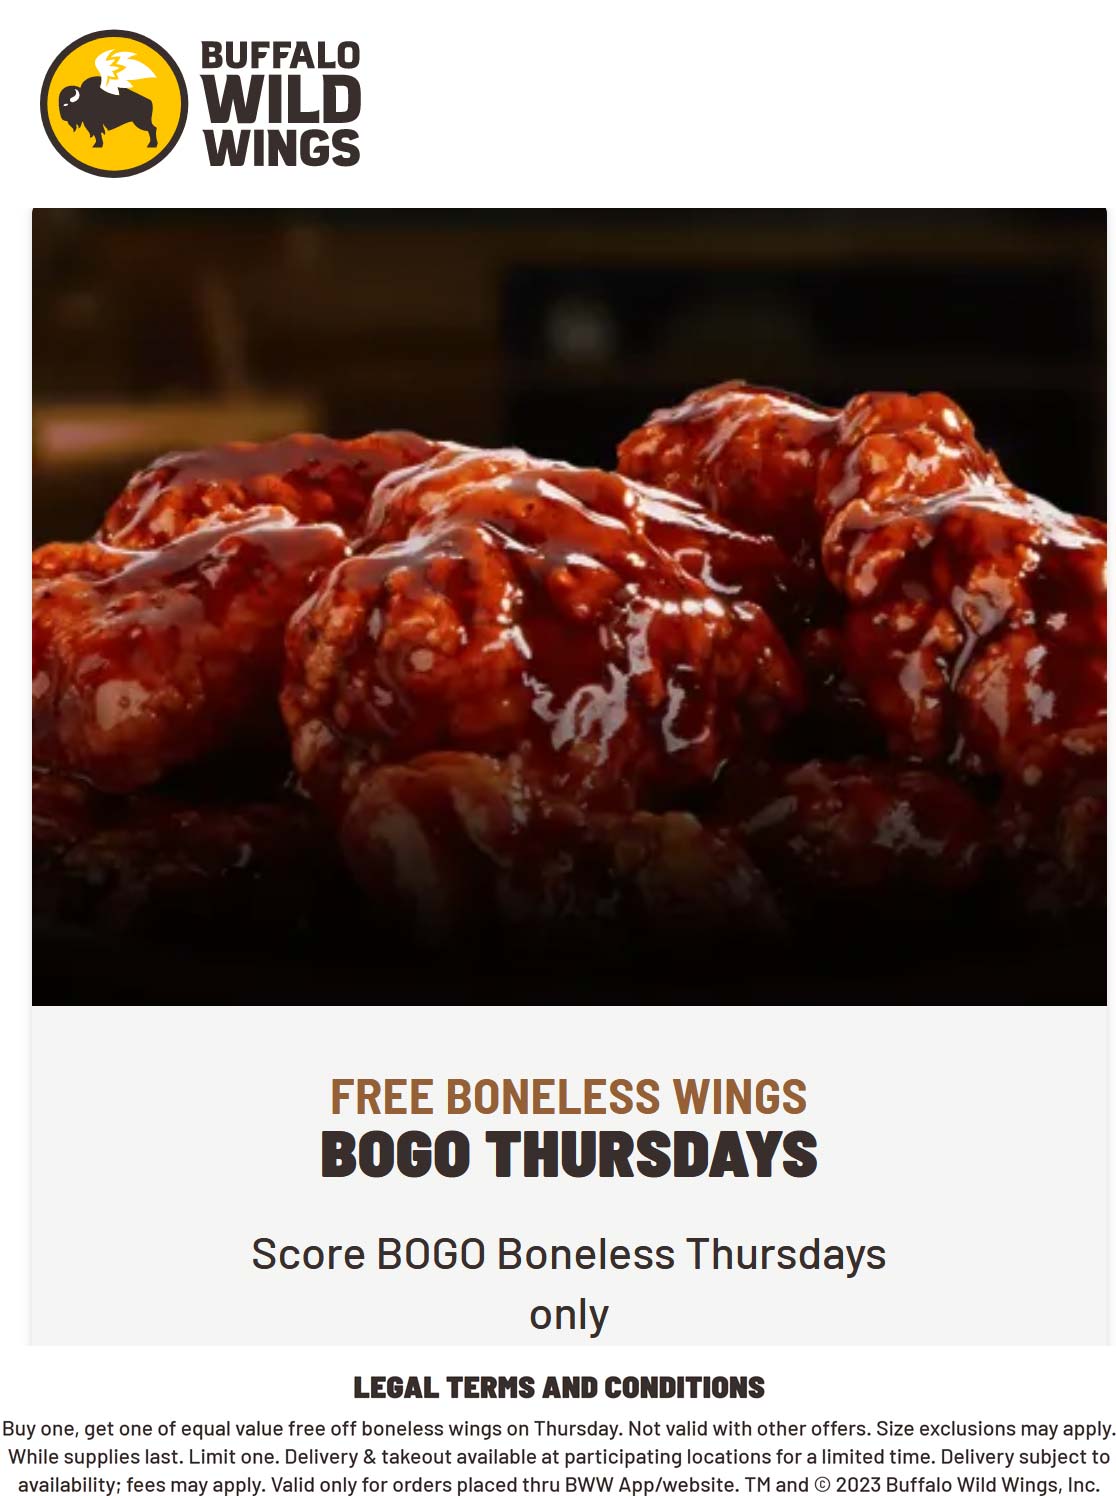 Buffalo Wild Wings restaurants Coupon  Second boneless wings free today at Buffalo Wild Wings restaurants #buffalowildwings 